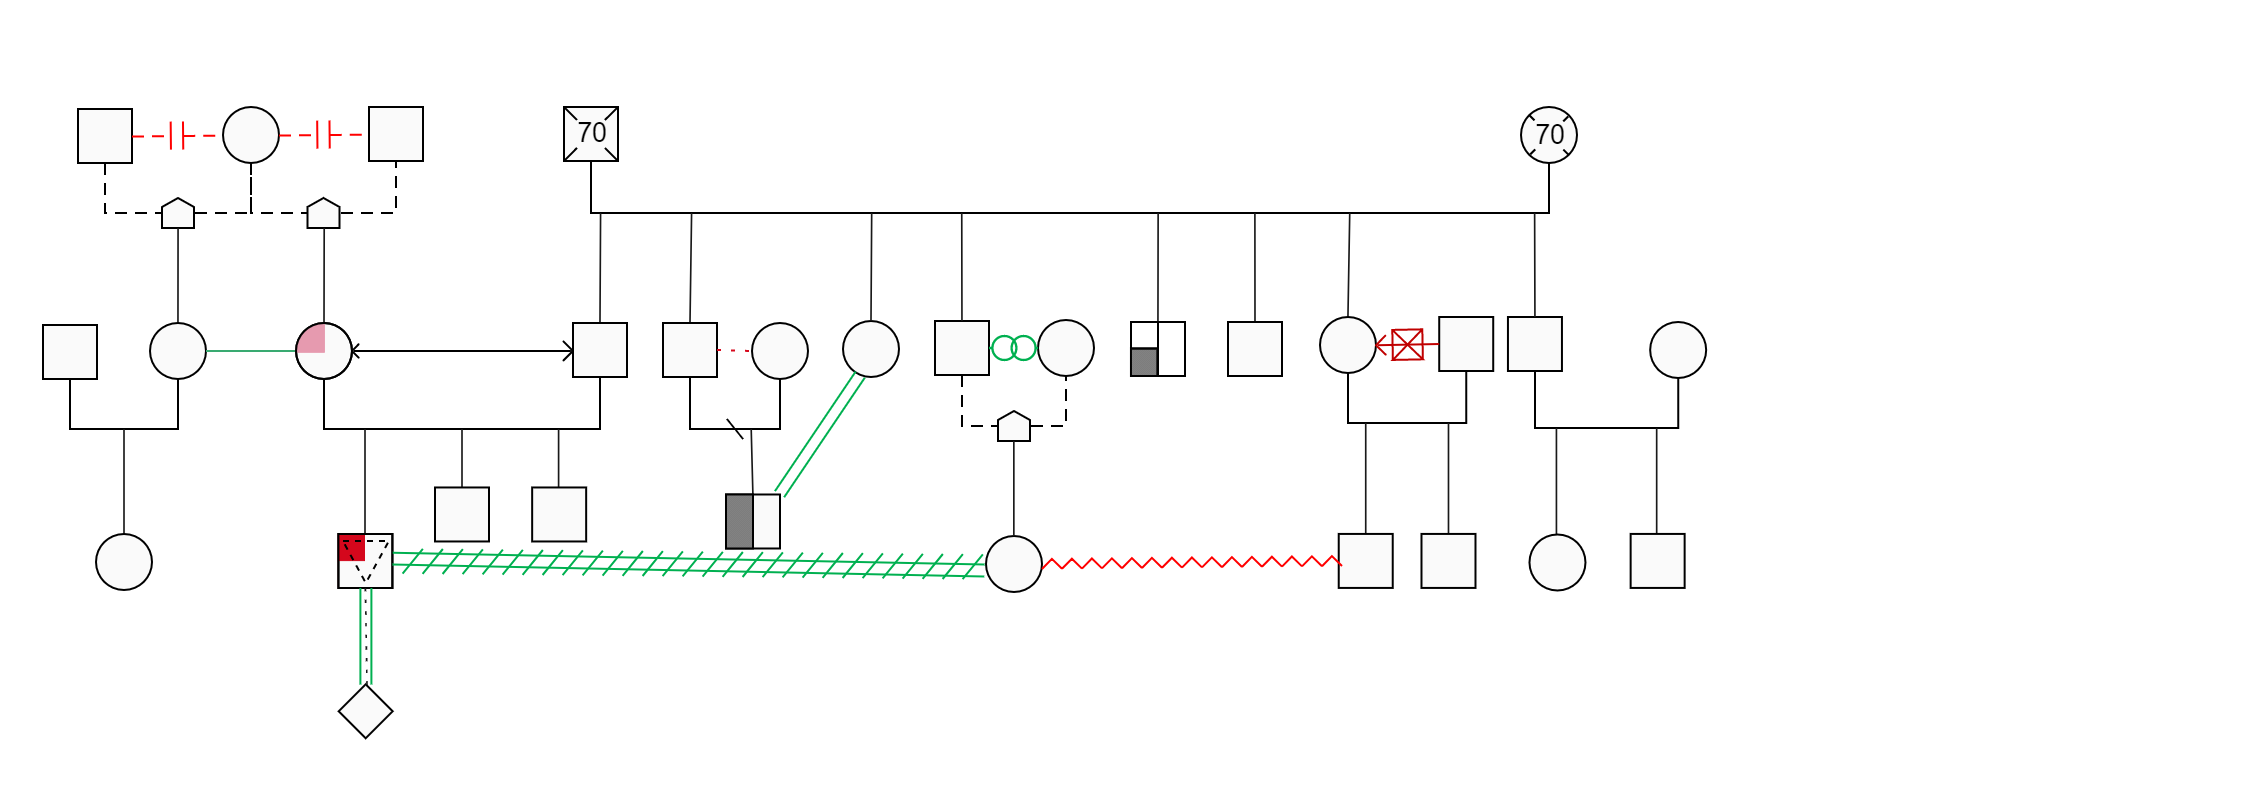 Complex visual family members relation diagram sample has depicted here. A genogram is a really useful tool for helping us to understand the key people and relationships in a client's life and is essentially an enhanced version of the family tree.  A geno